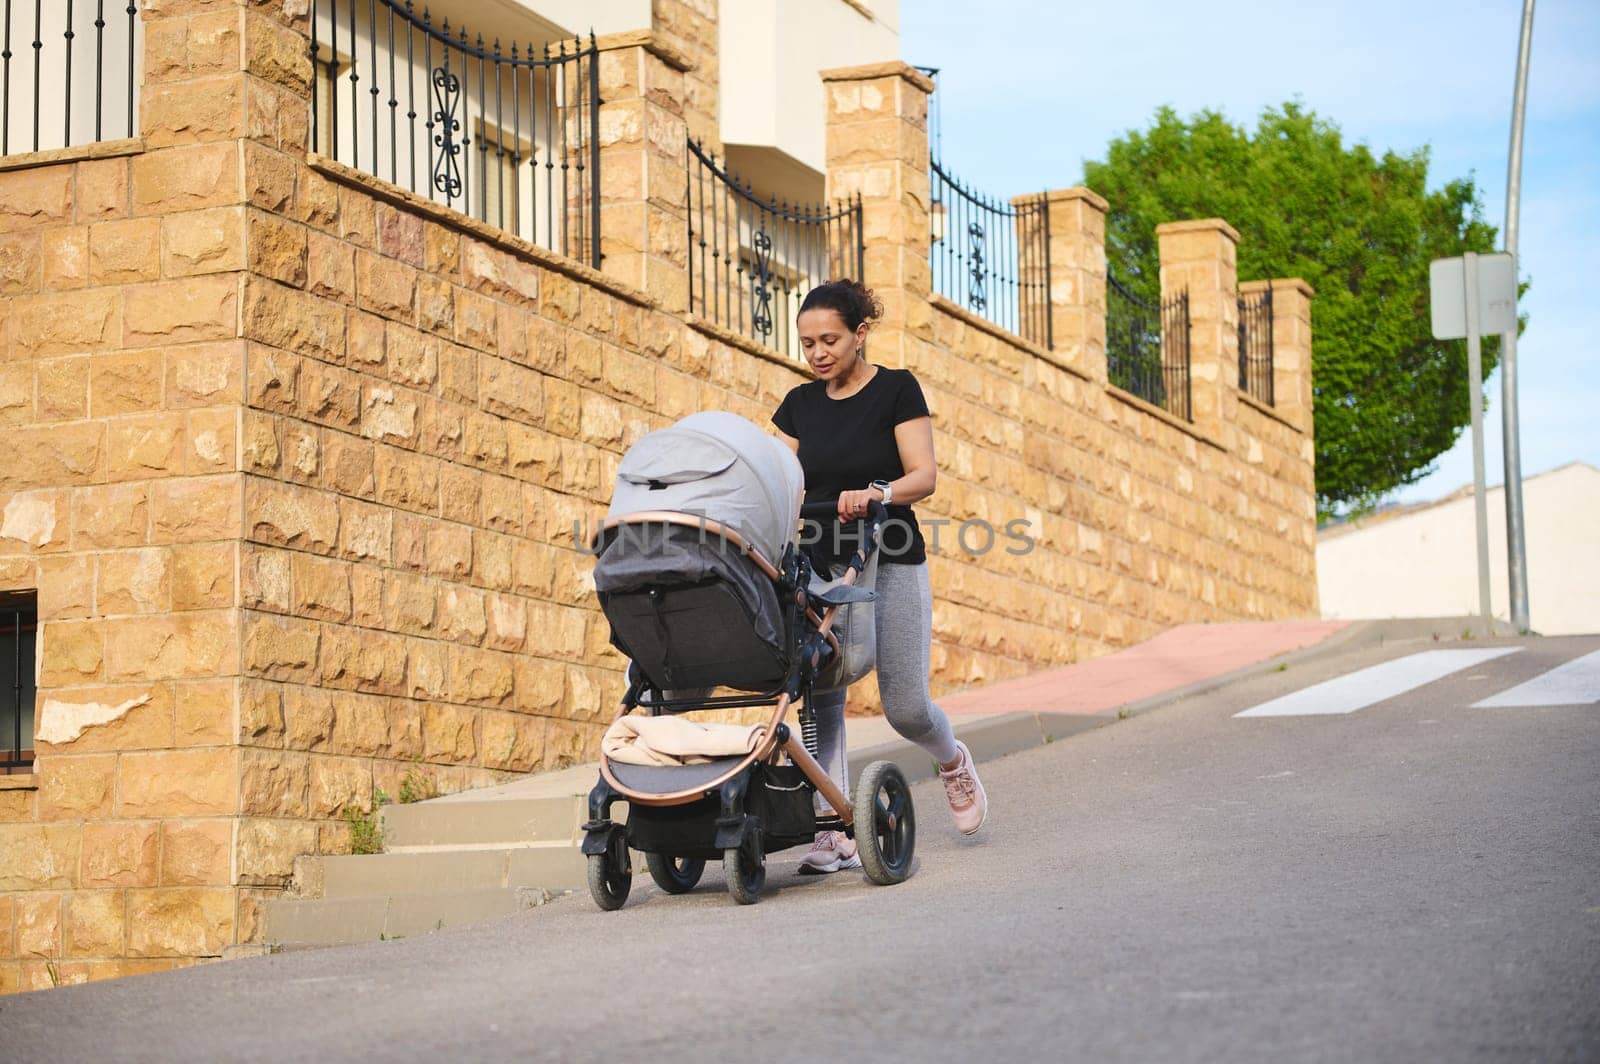 A smiling young woman in black t-shirt and gray sports leggings, pushing baby buggy while exercising outdoors. People. Maternity and infancy. Fitness with baby. Active and healthy lifestyle concept